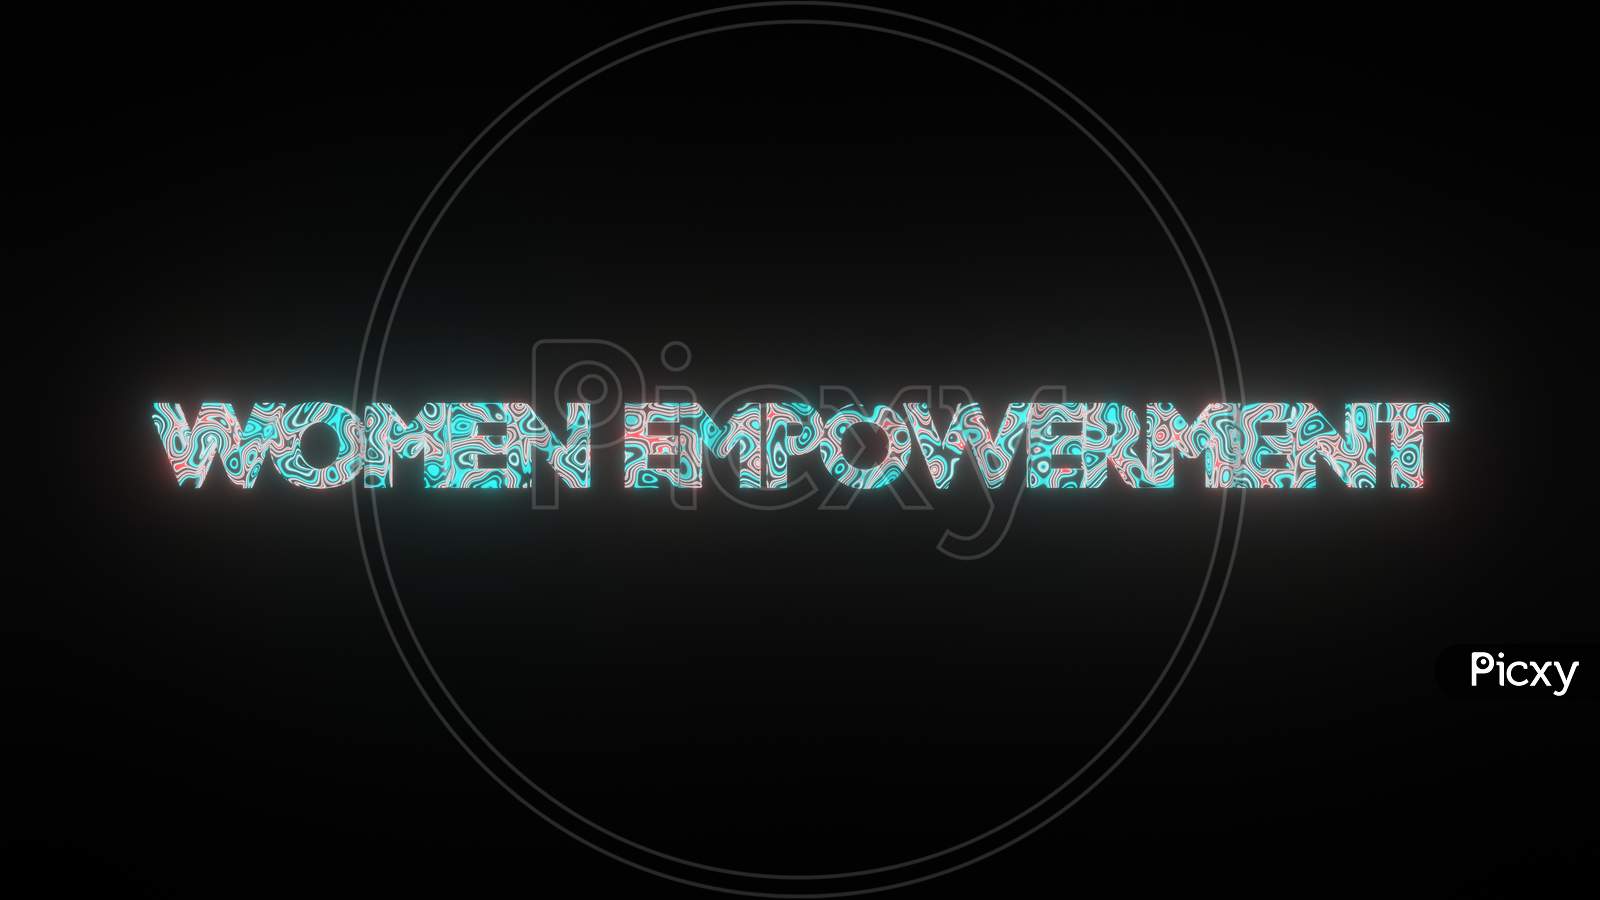 Illustration Graphic Of Beautiful Texture Or Pattern On The Text Women Empowerment, Isolated On Black Background. 3D Rendering Abstract Loop Neon Lighting Effect On Letter Women Empowerment.